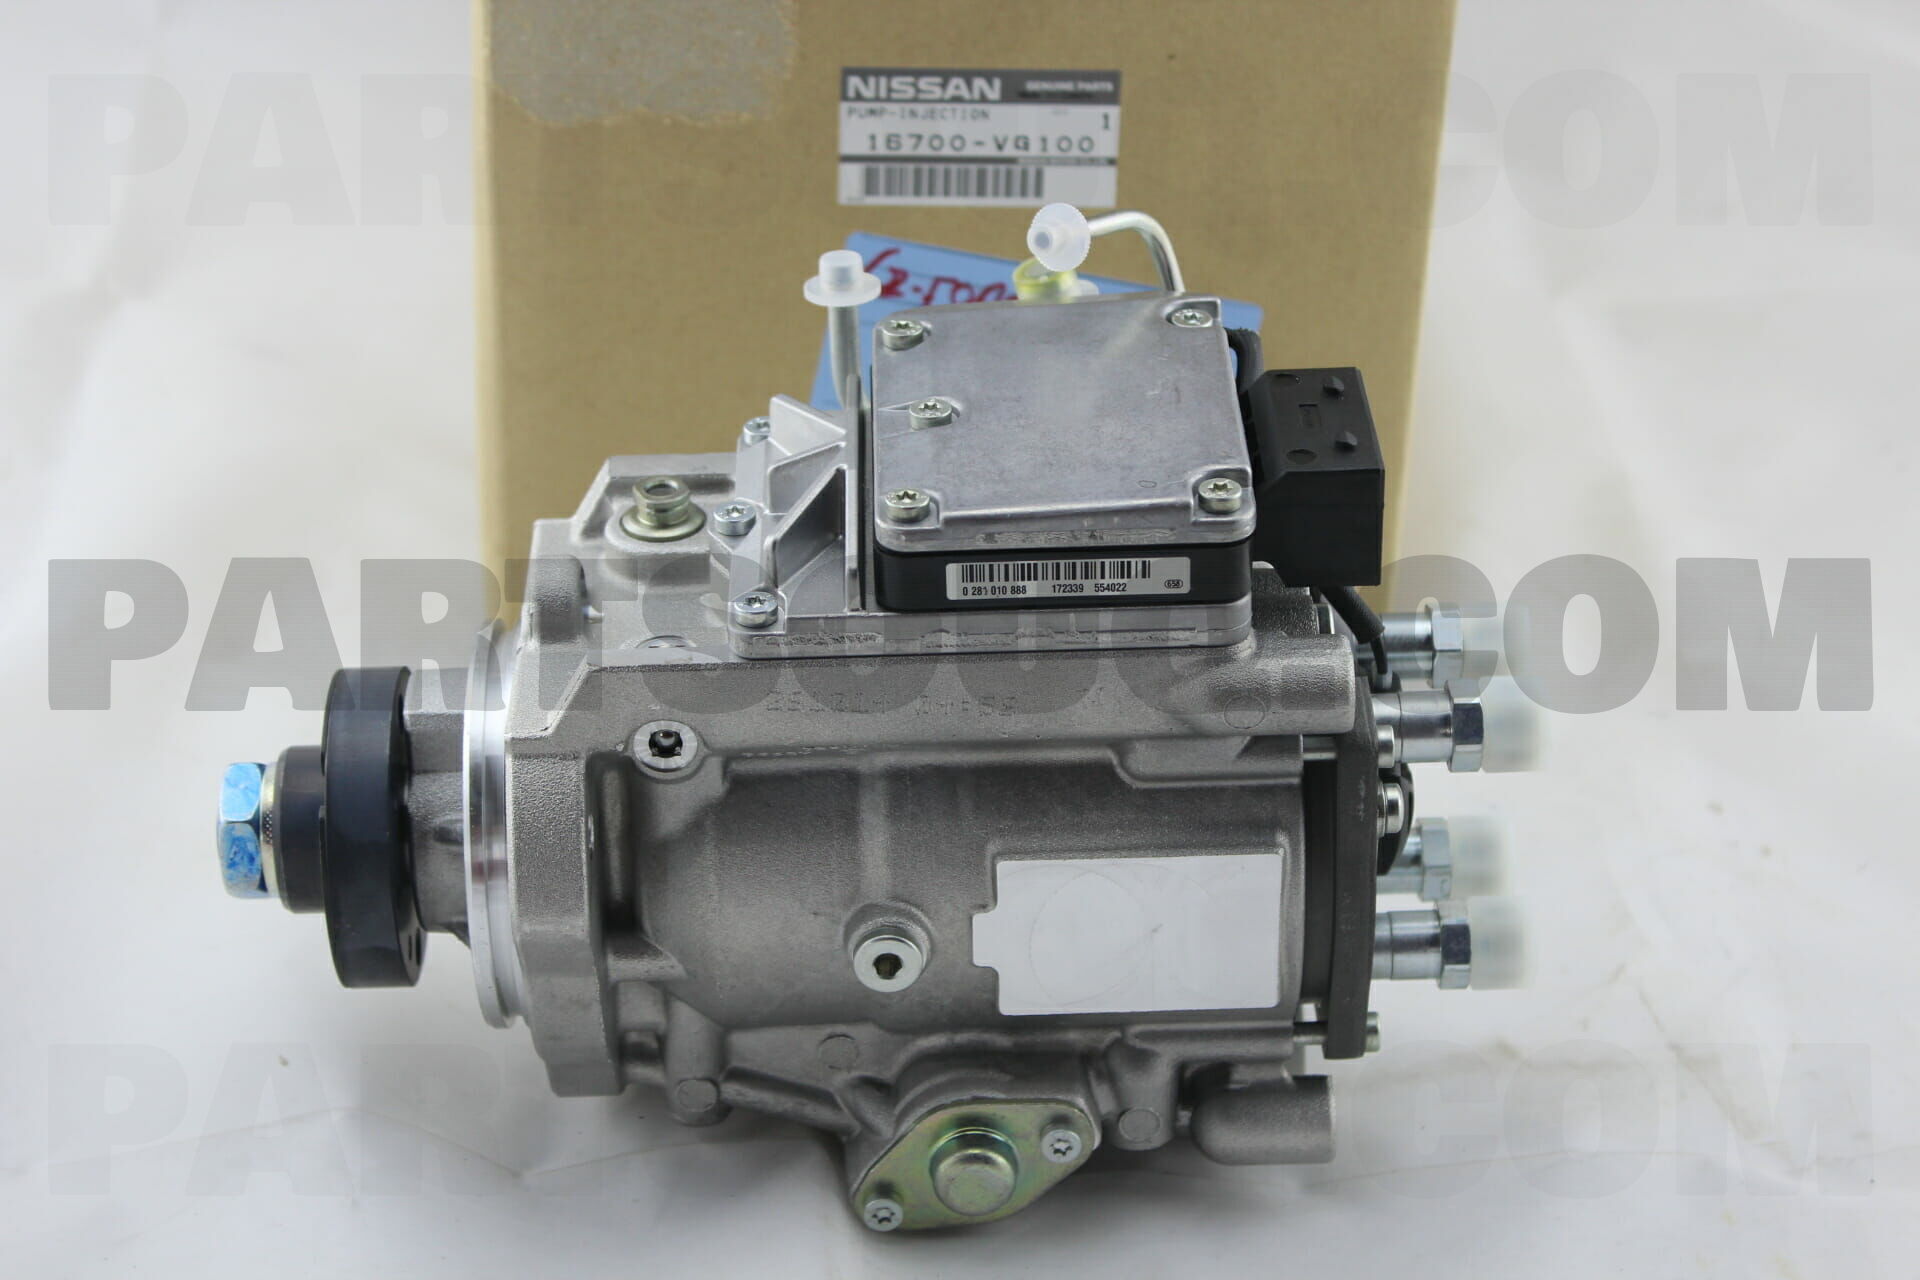 16700VG100 Nissan PUMP ASSY-INJECTION Price: 5370.72 